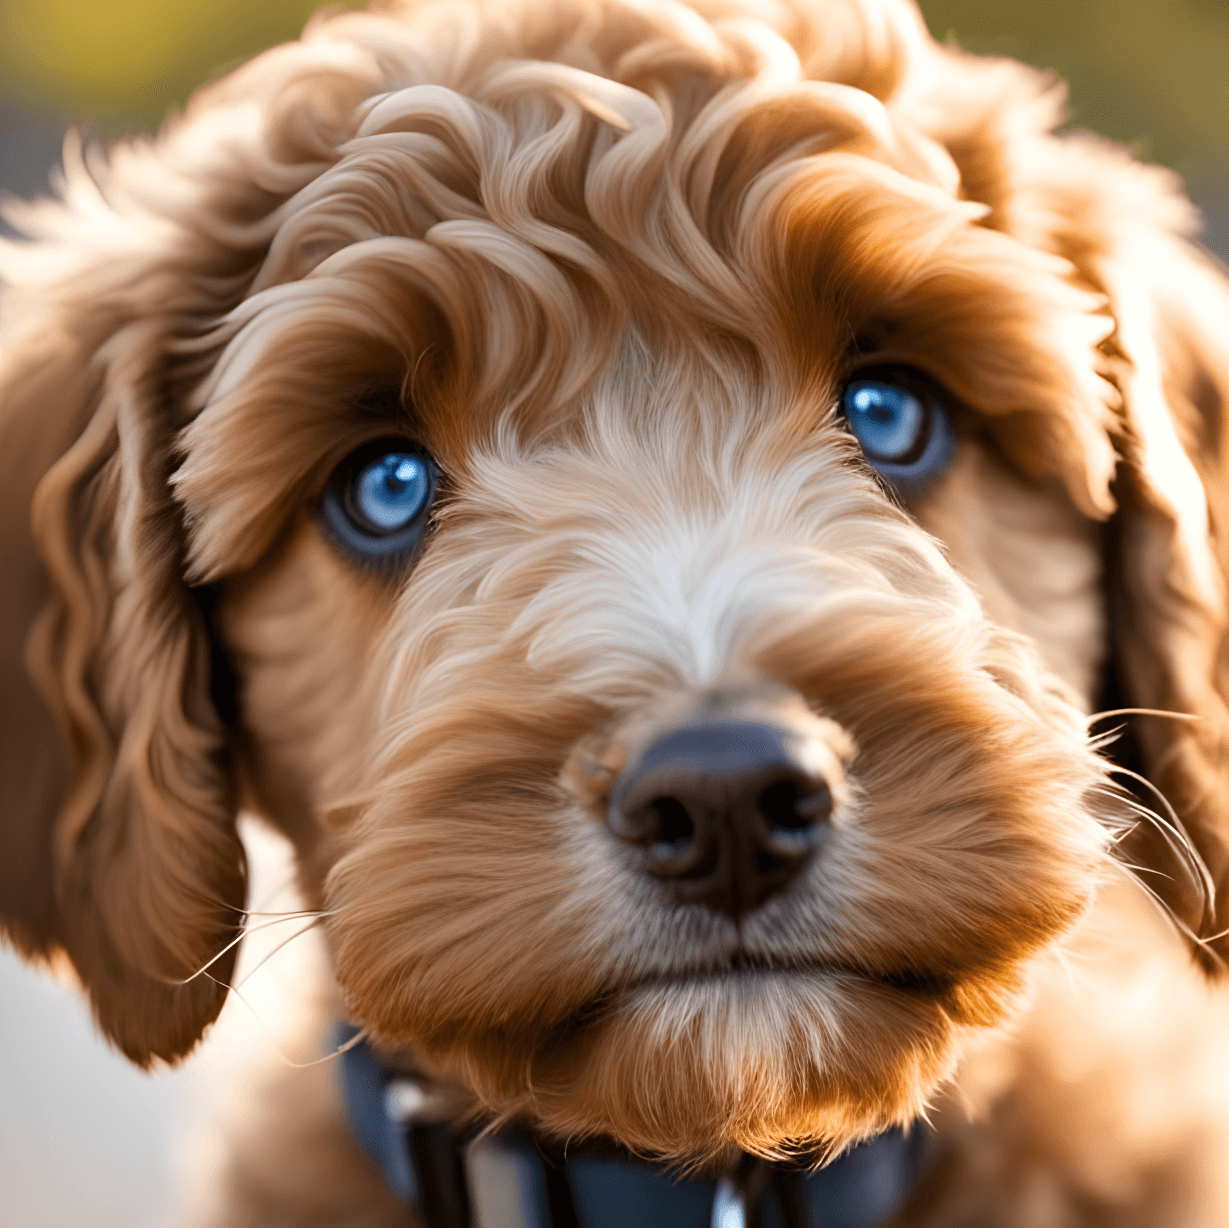 A Cute Labradoodle Puppy With Its Adorable Eyes Looking Straight Into The Camera